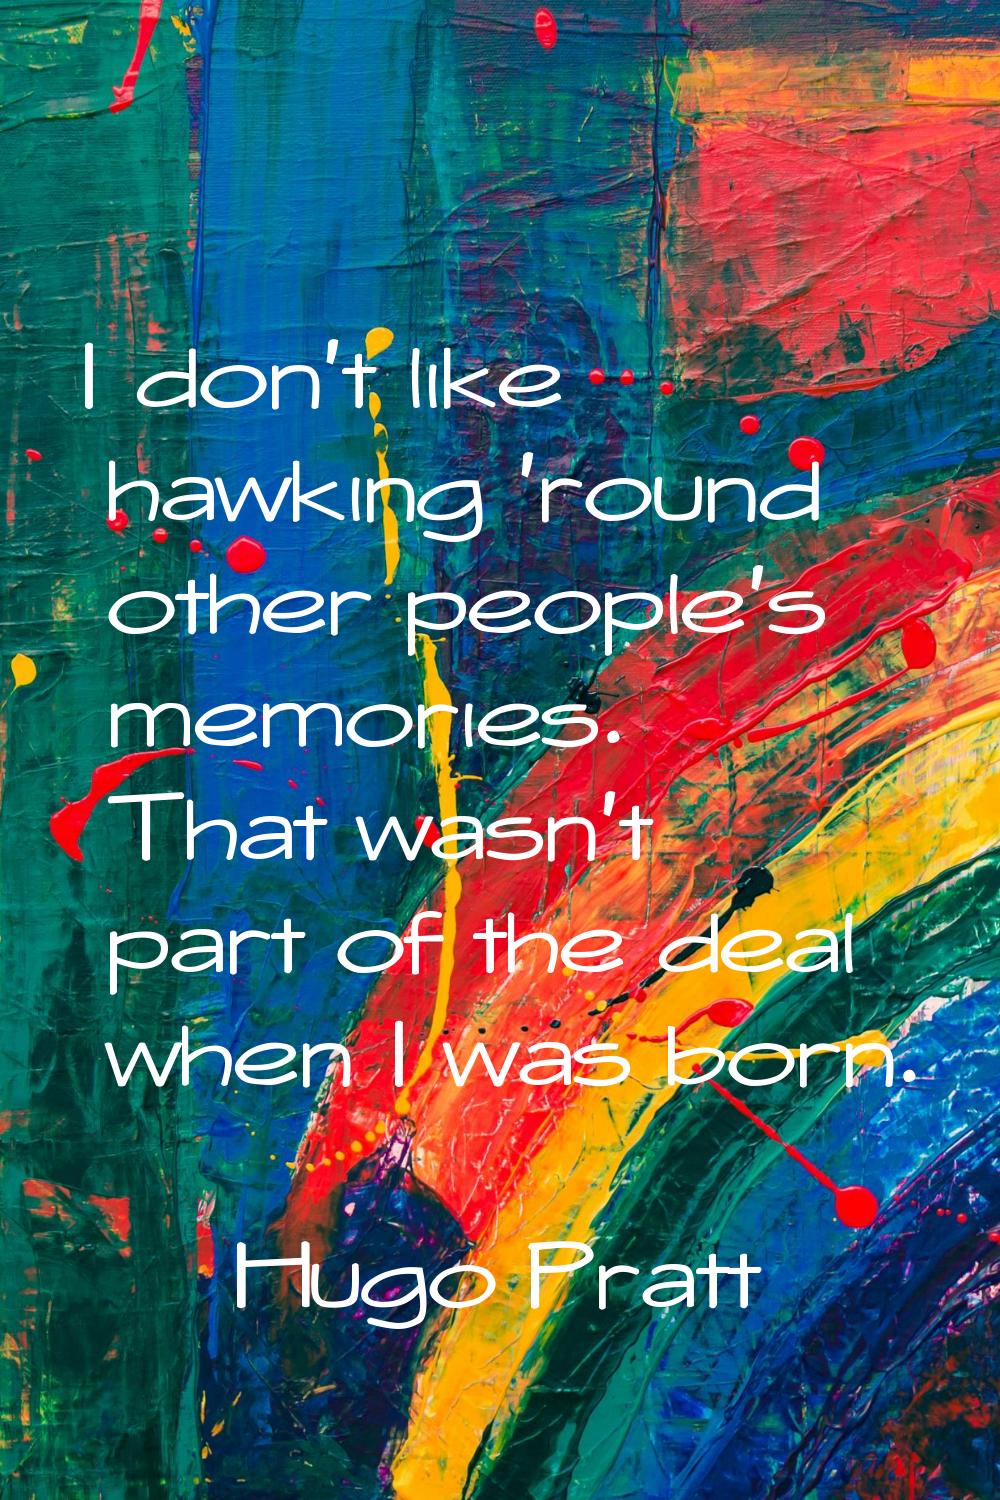 I don't like hawking 'round other people's memories. That wasn't part of the deal when I was born.